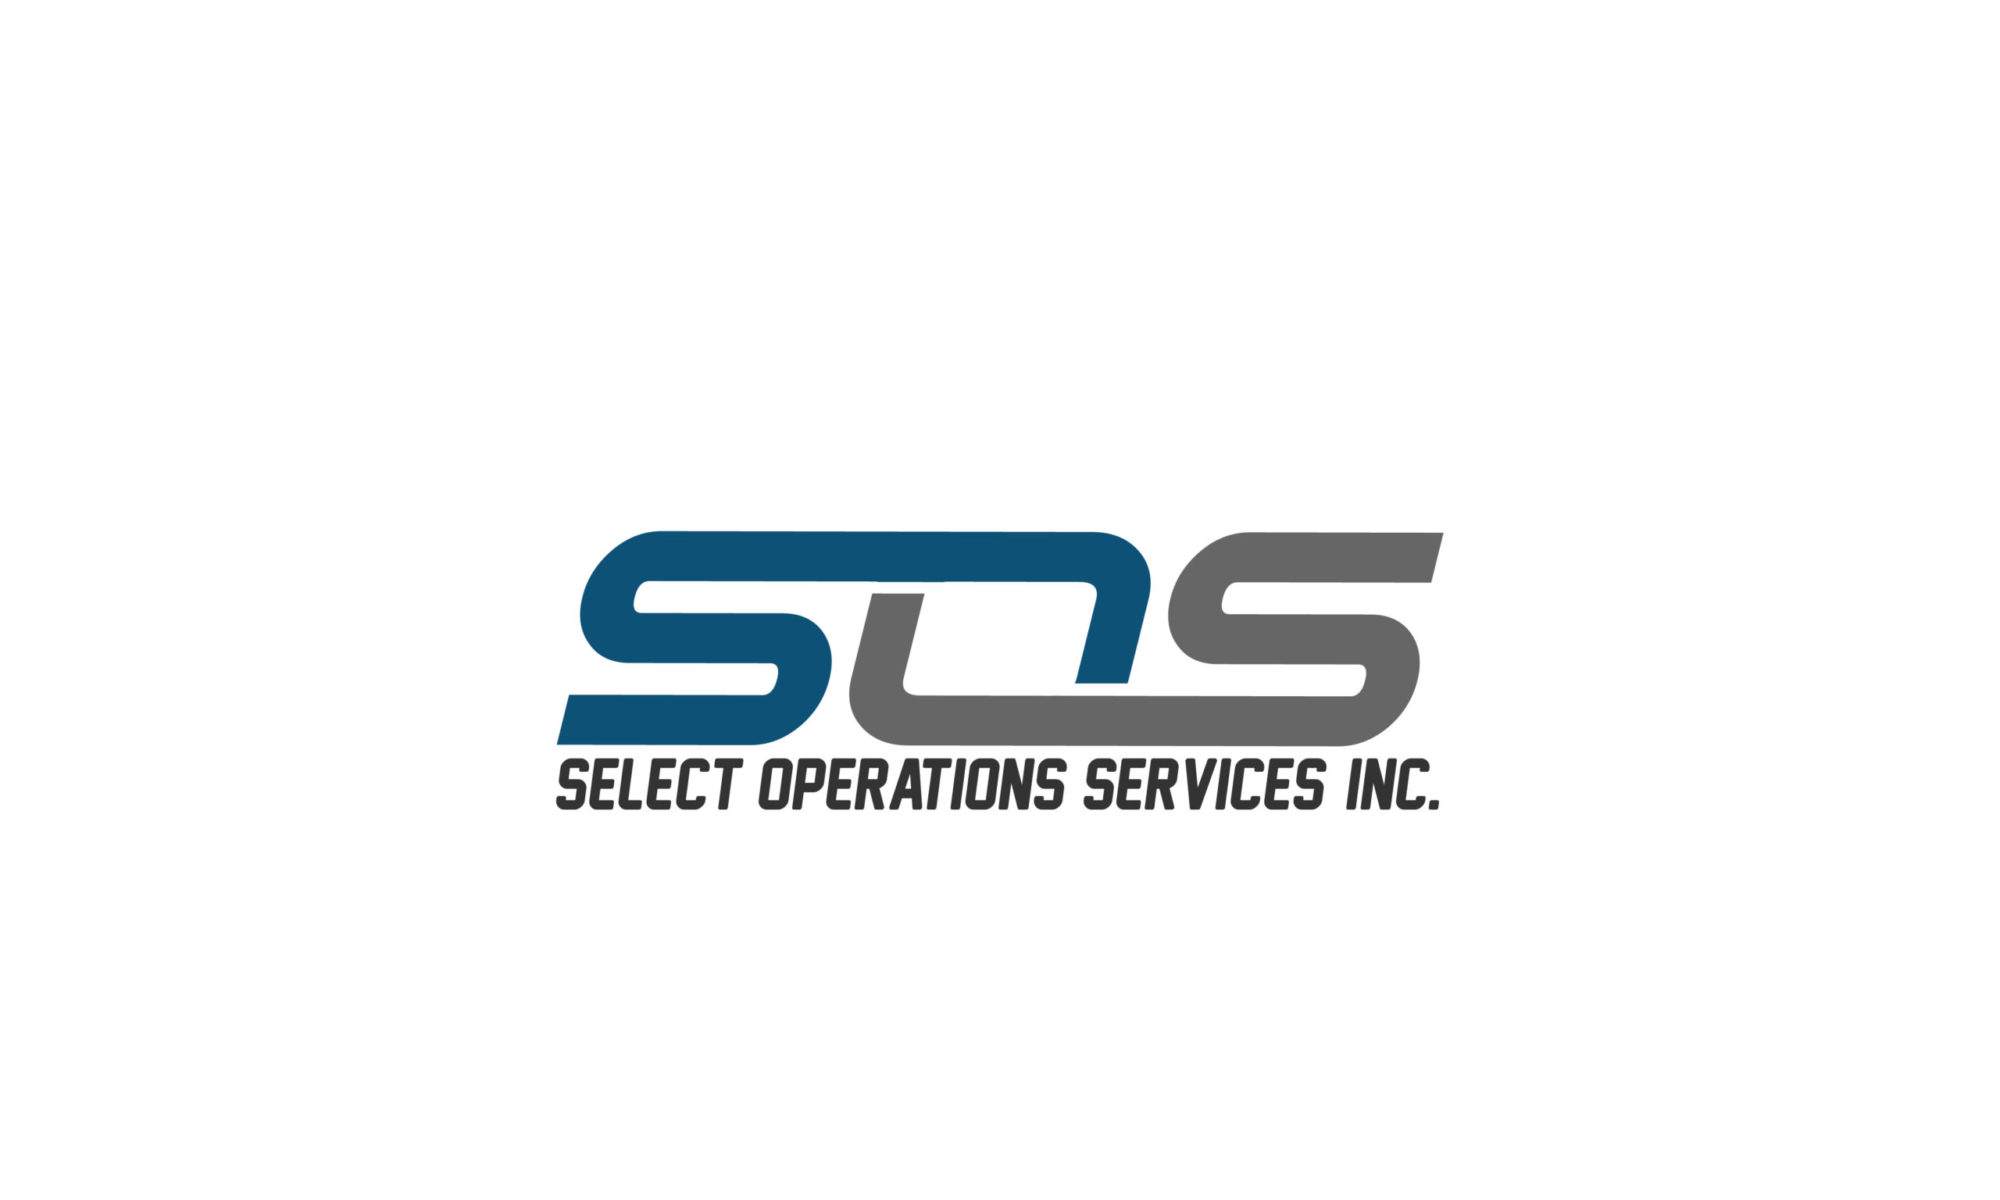 Select Operations services, inc